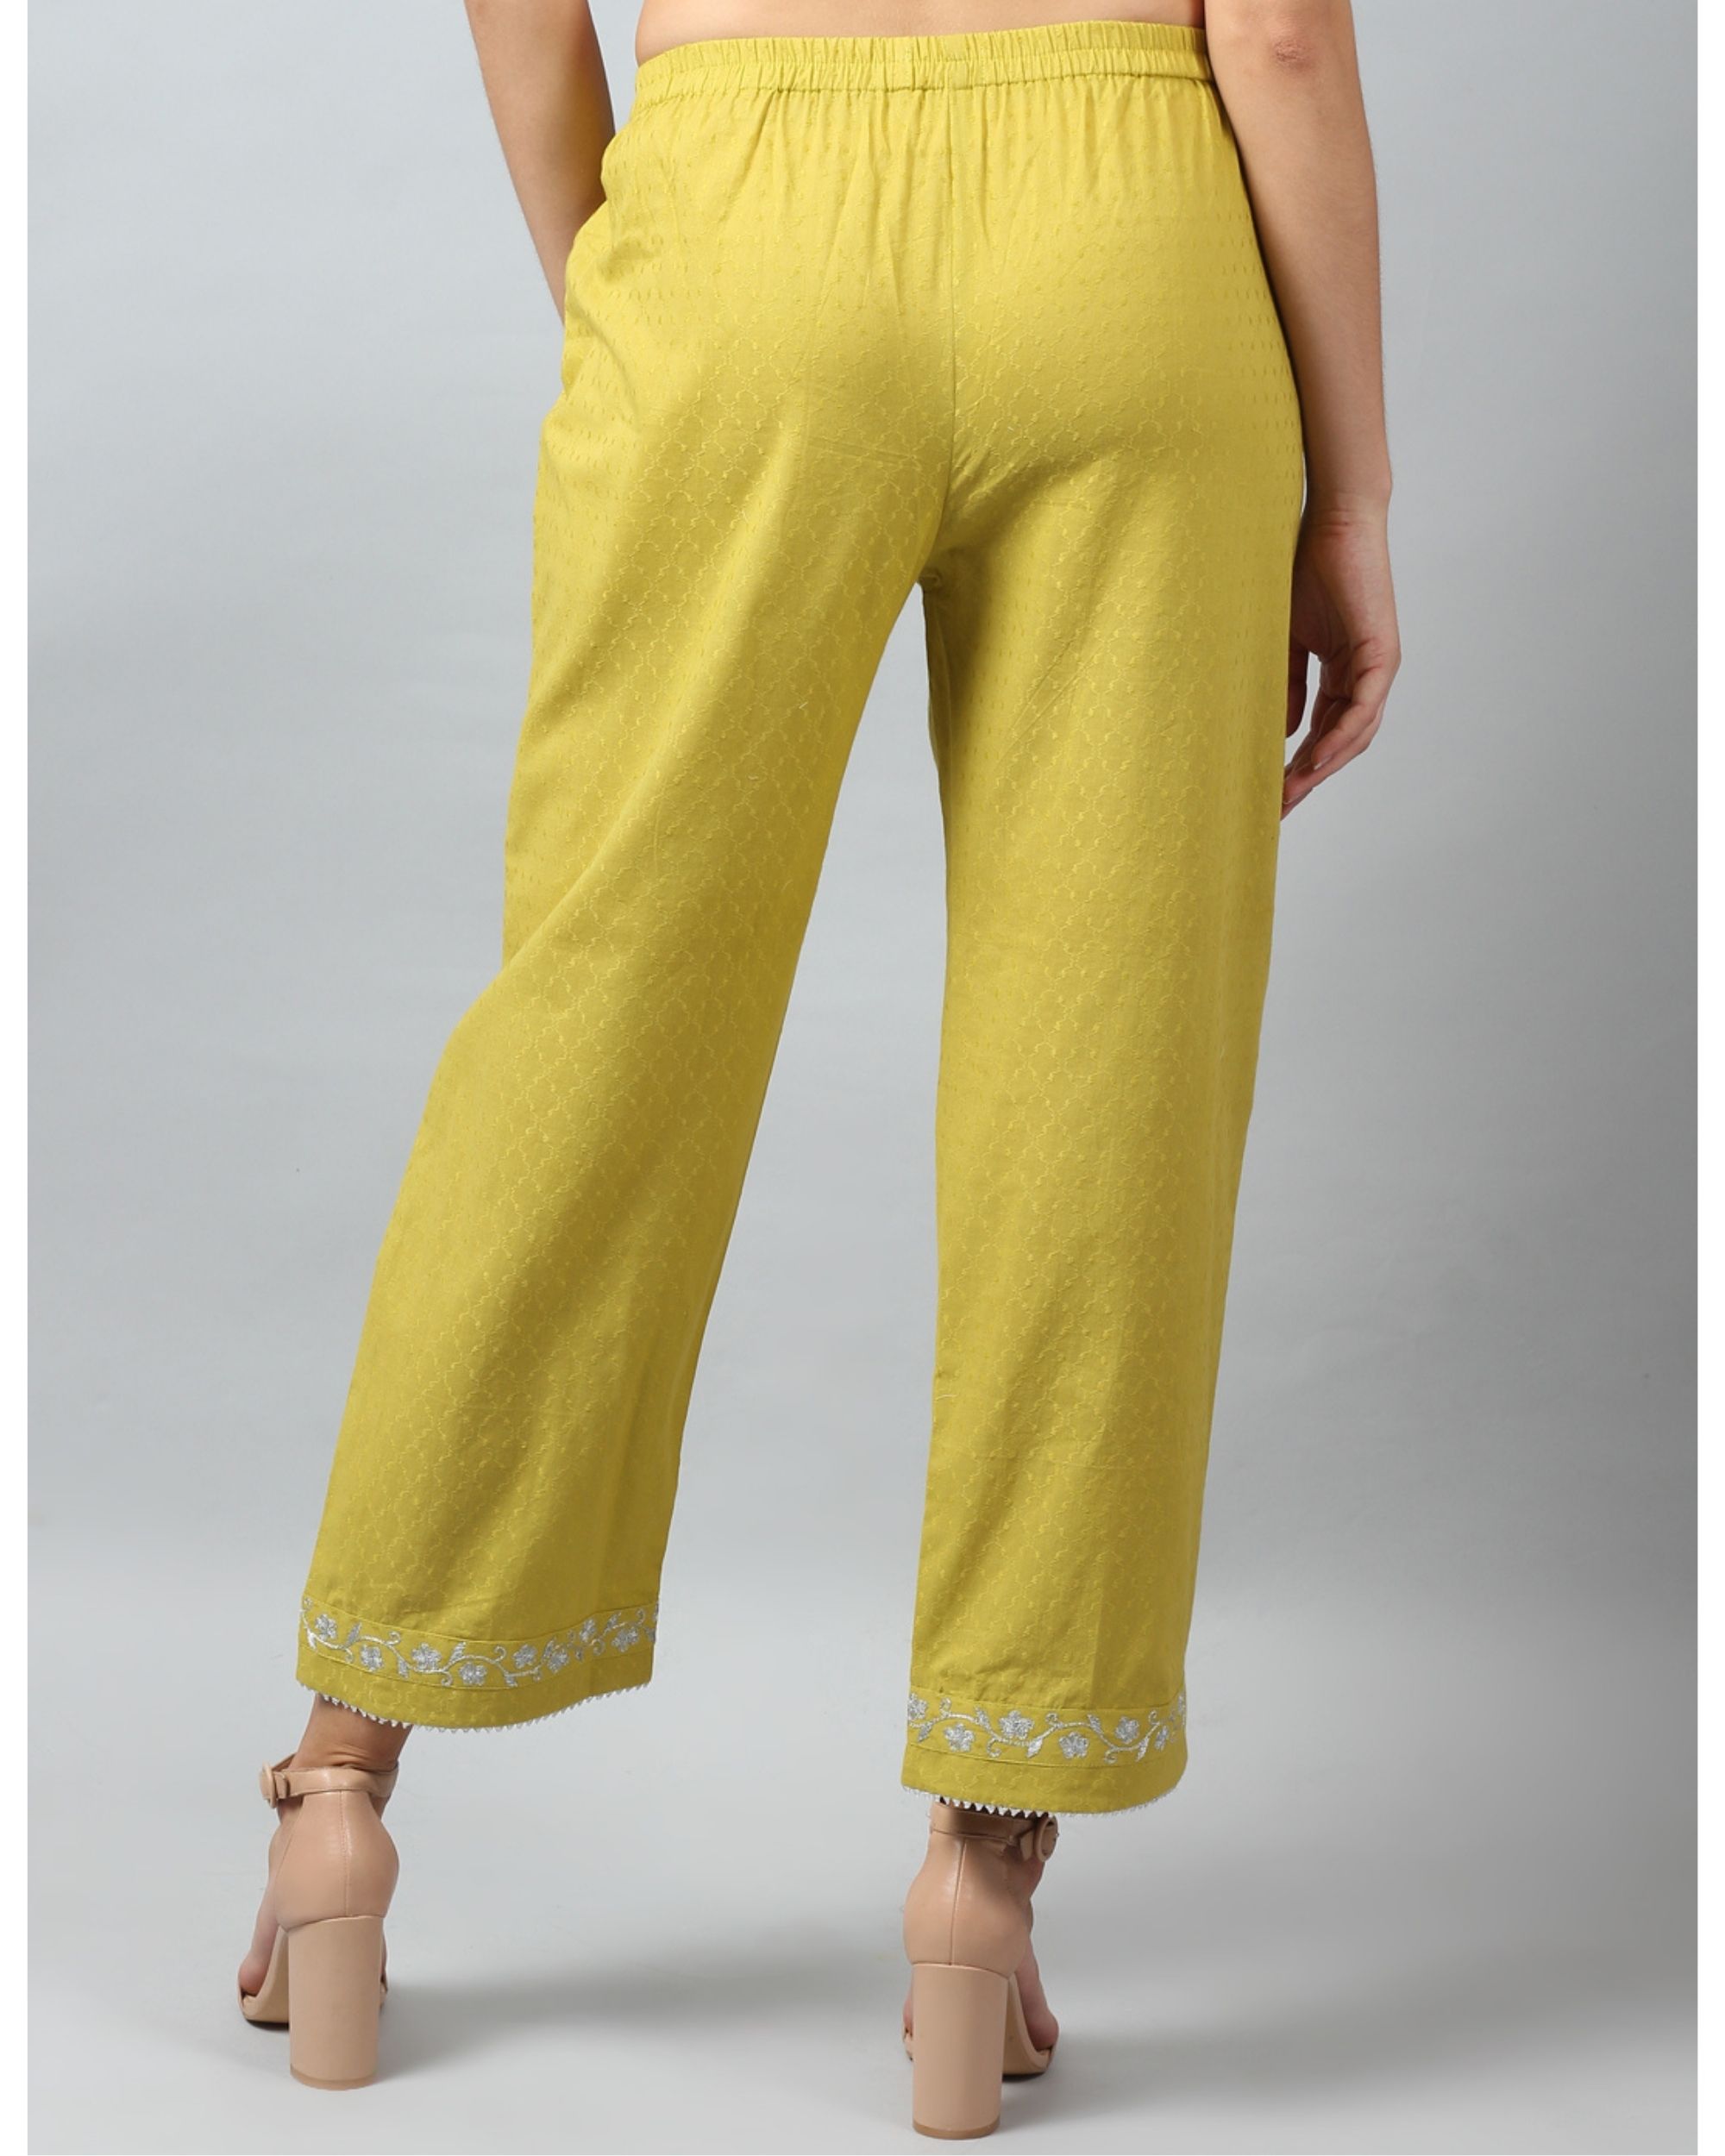 Chartreuse embroidered pants by D'ART STUDIO | The Secret Label